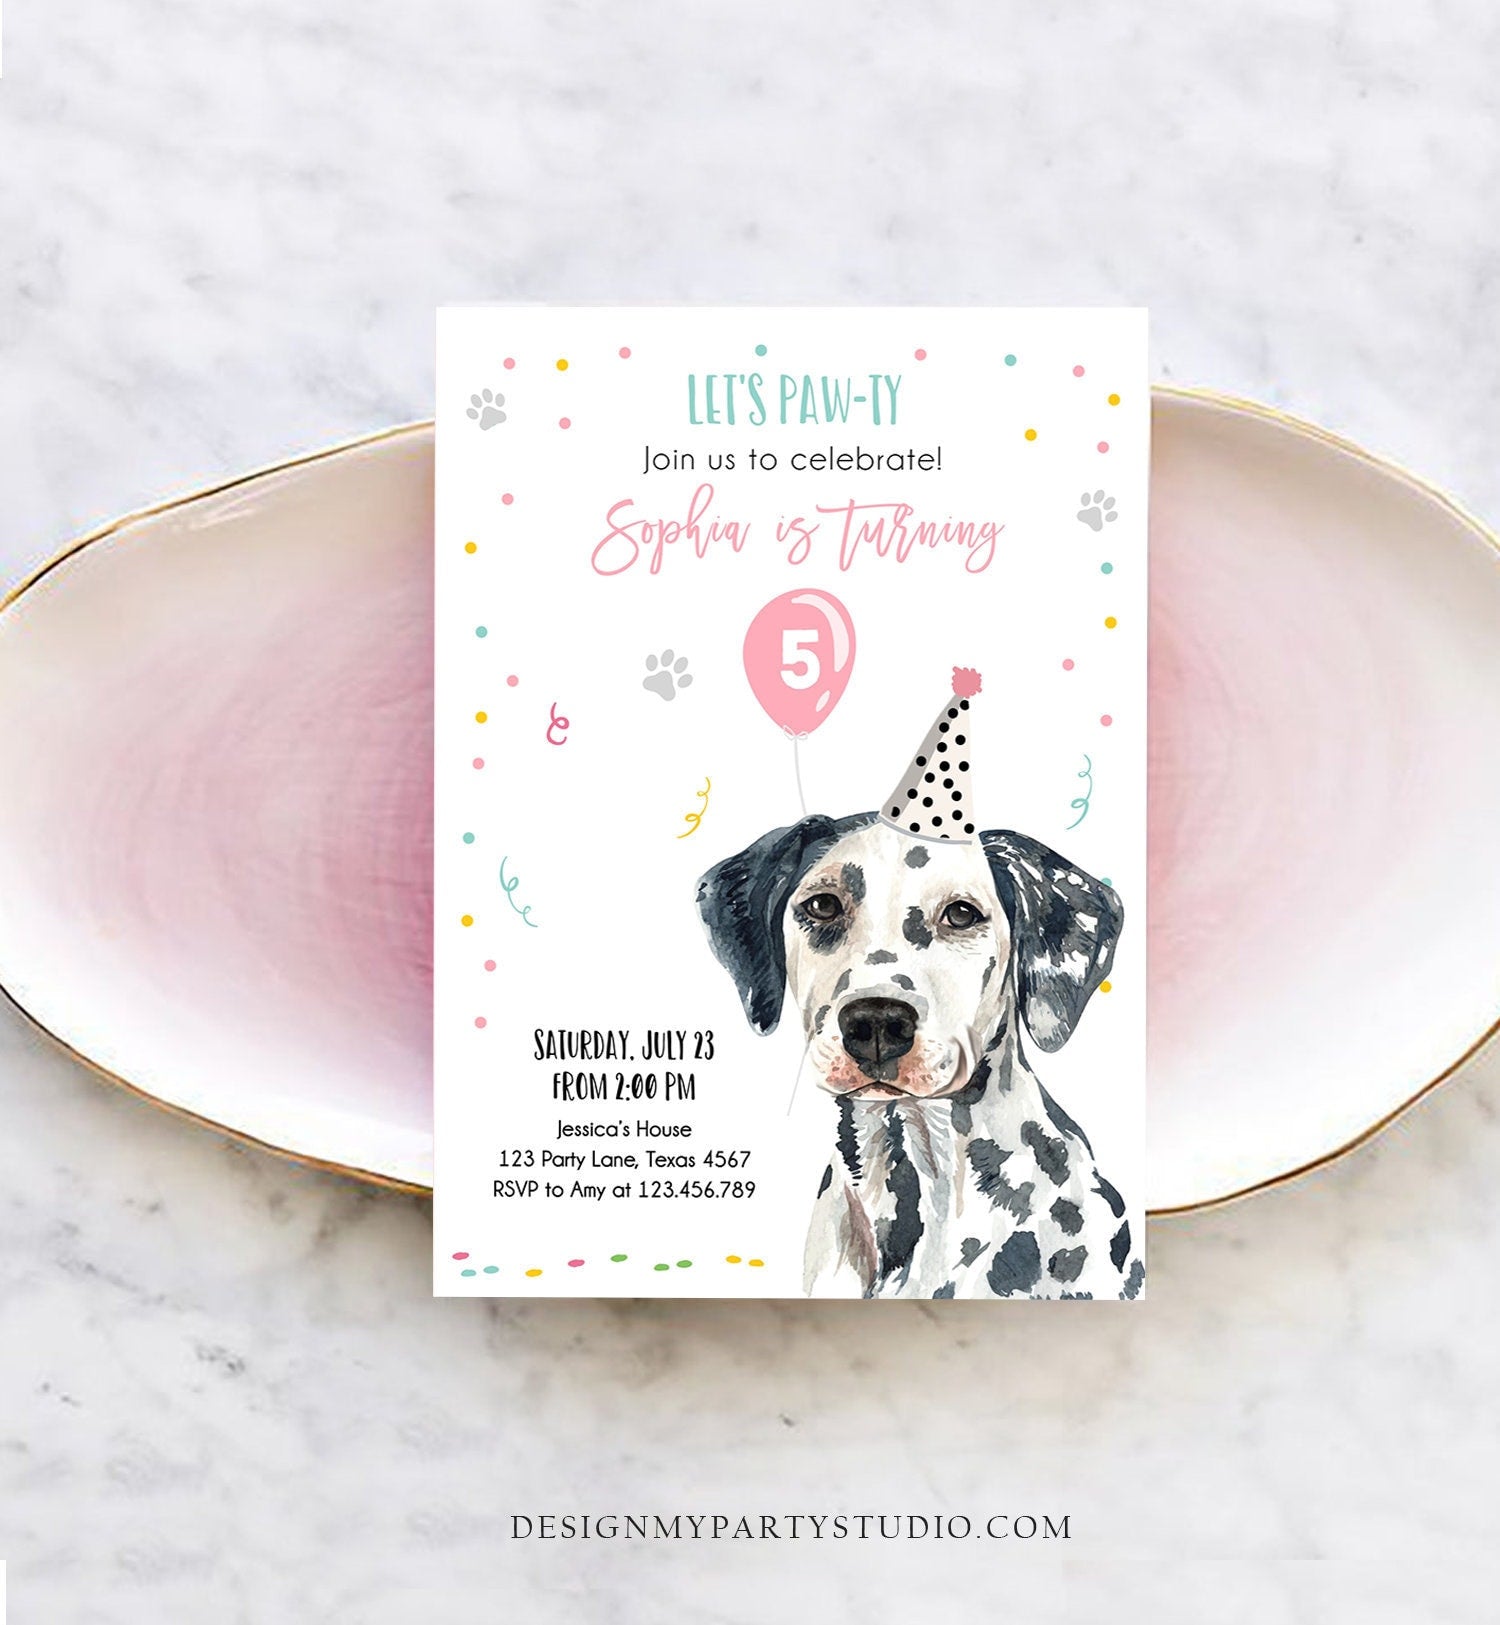 Editable Dog Birthday Party Invitation Dalmatian Birthday Invite Pink Girl Come Sit Stay Party Animal Download Printable Template Corjl 0384